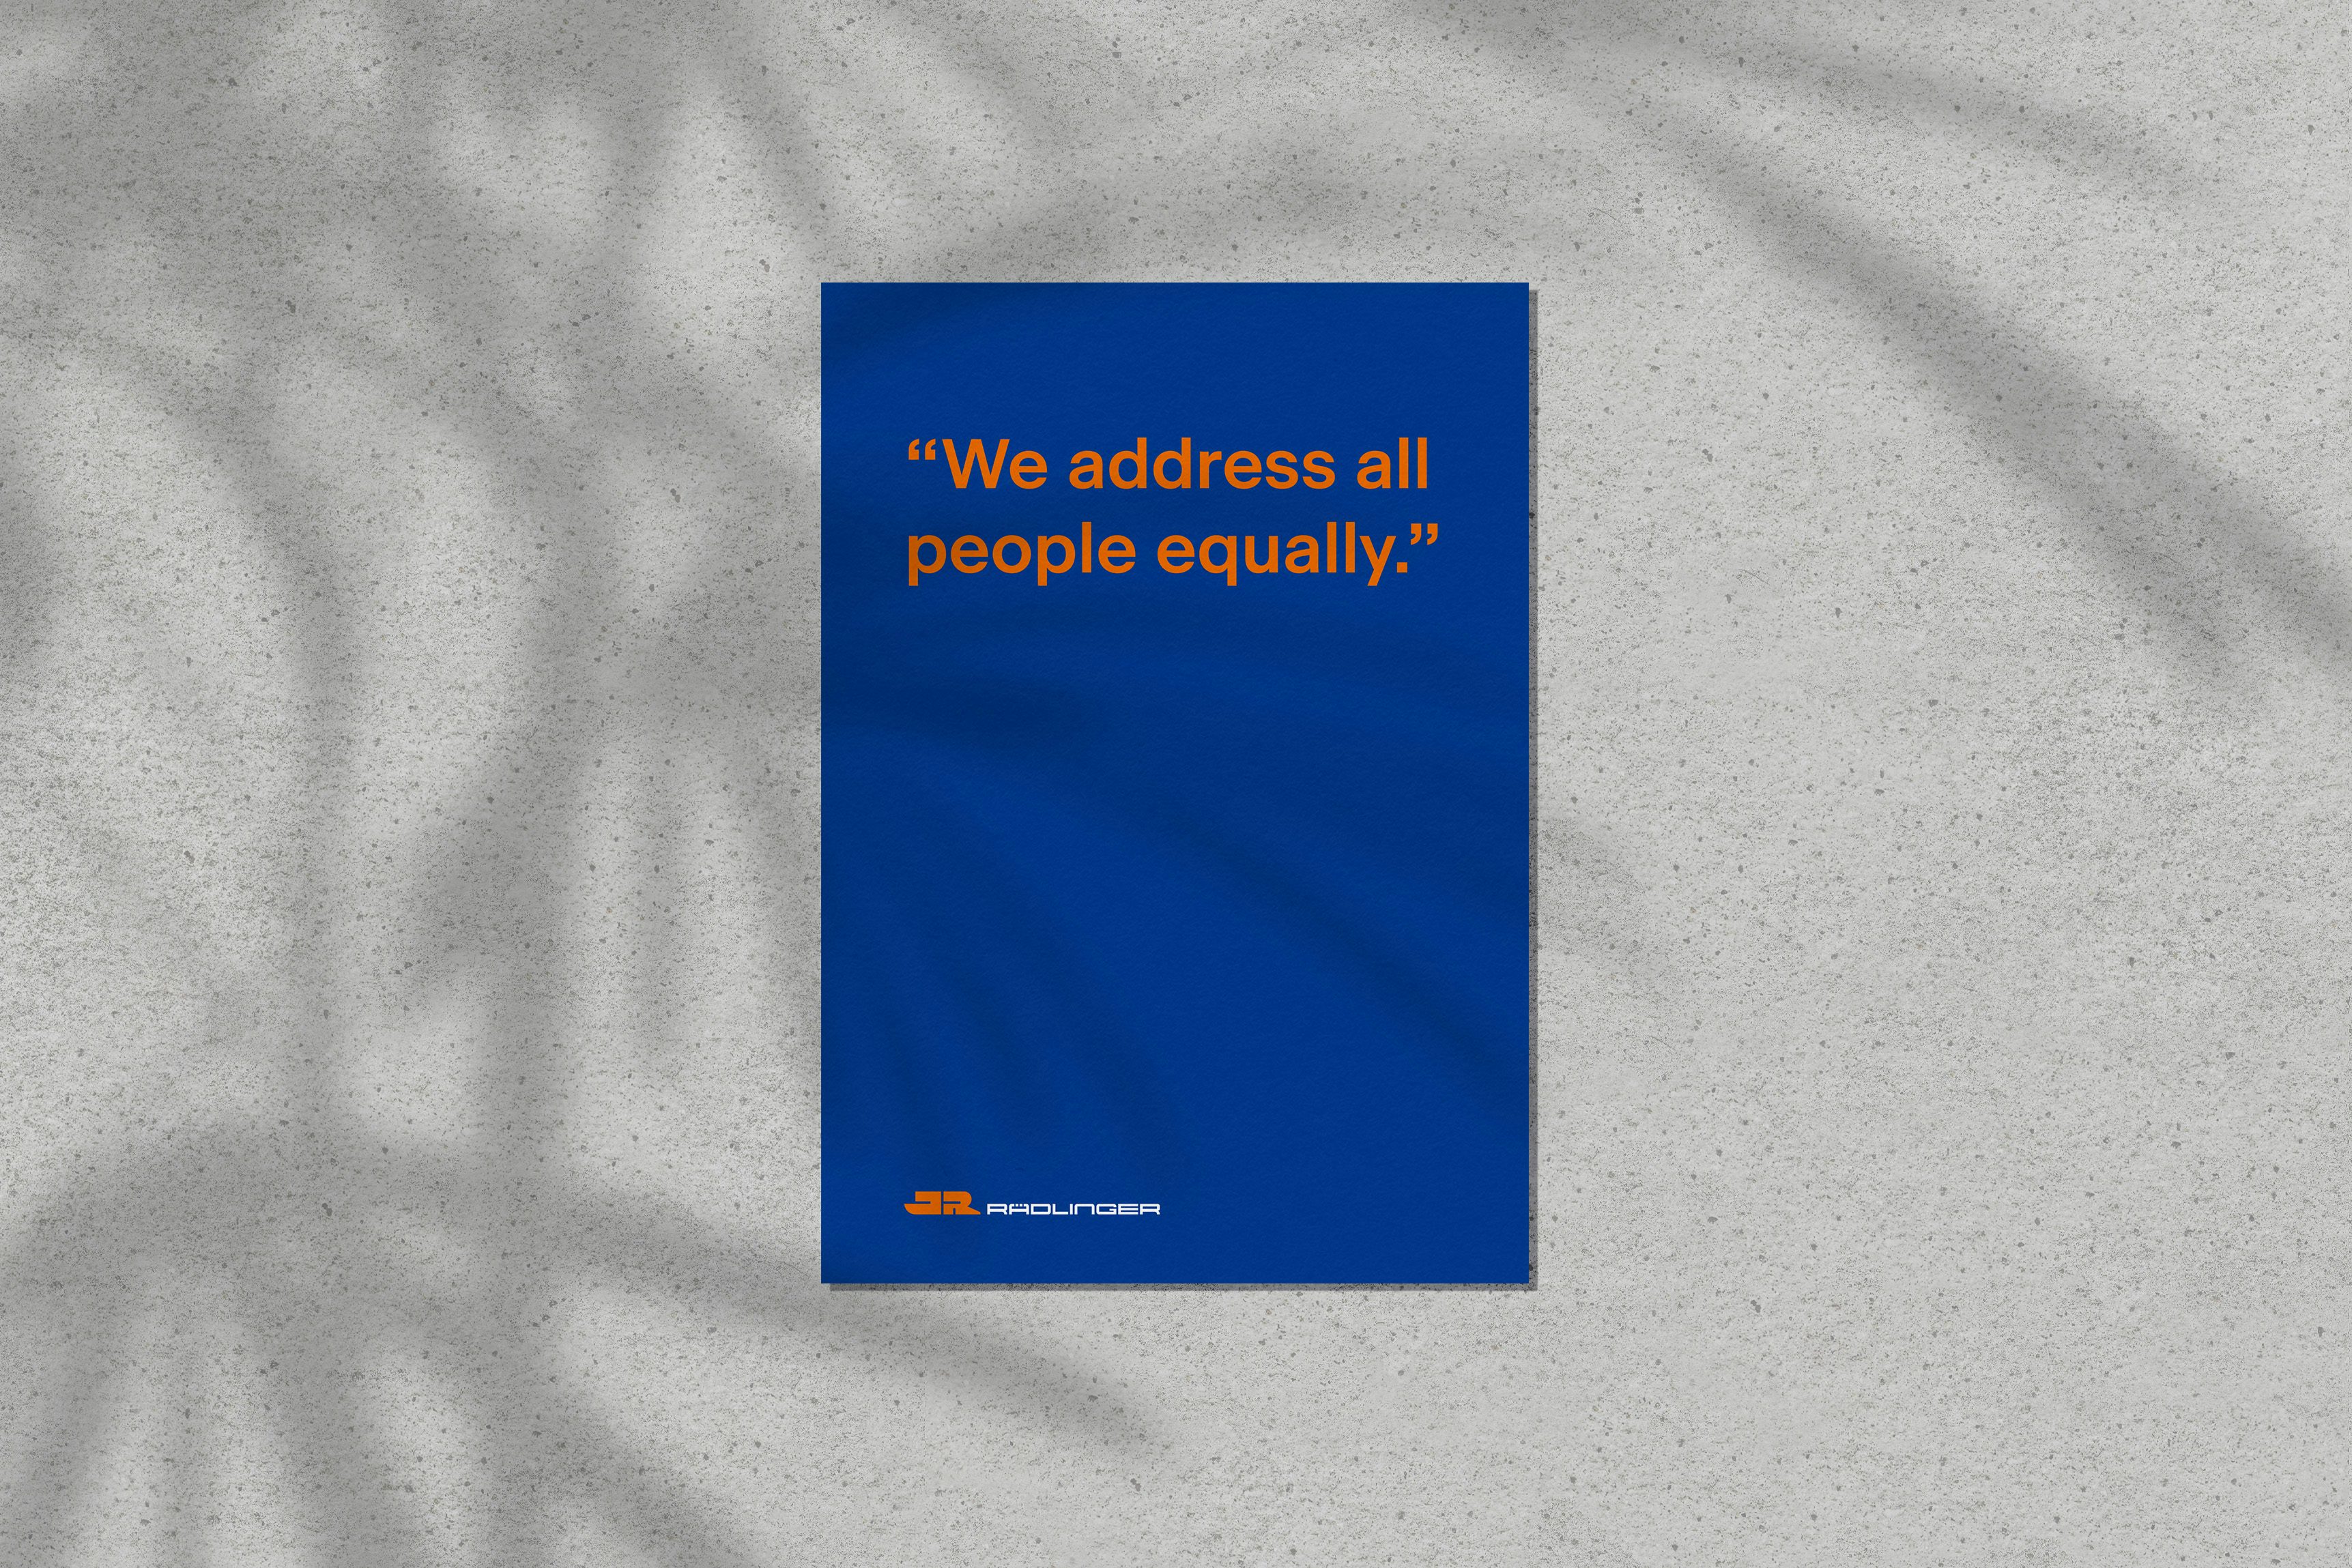 Blue sheet of paper on which is written in orange lettering, "We address all people equally."